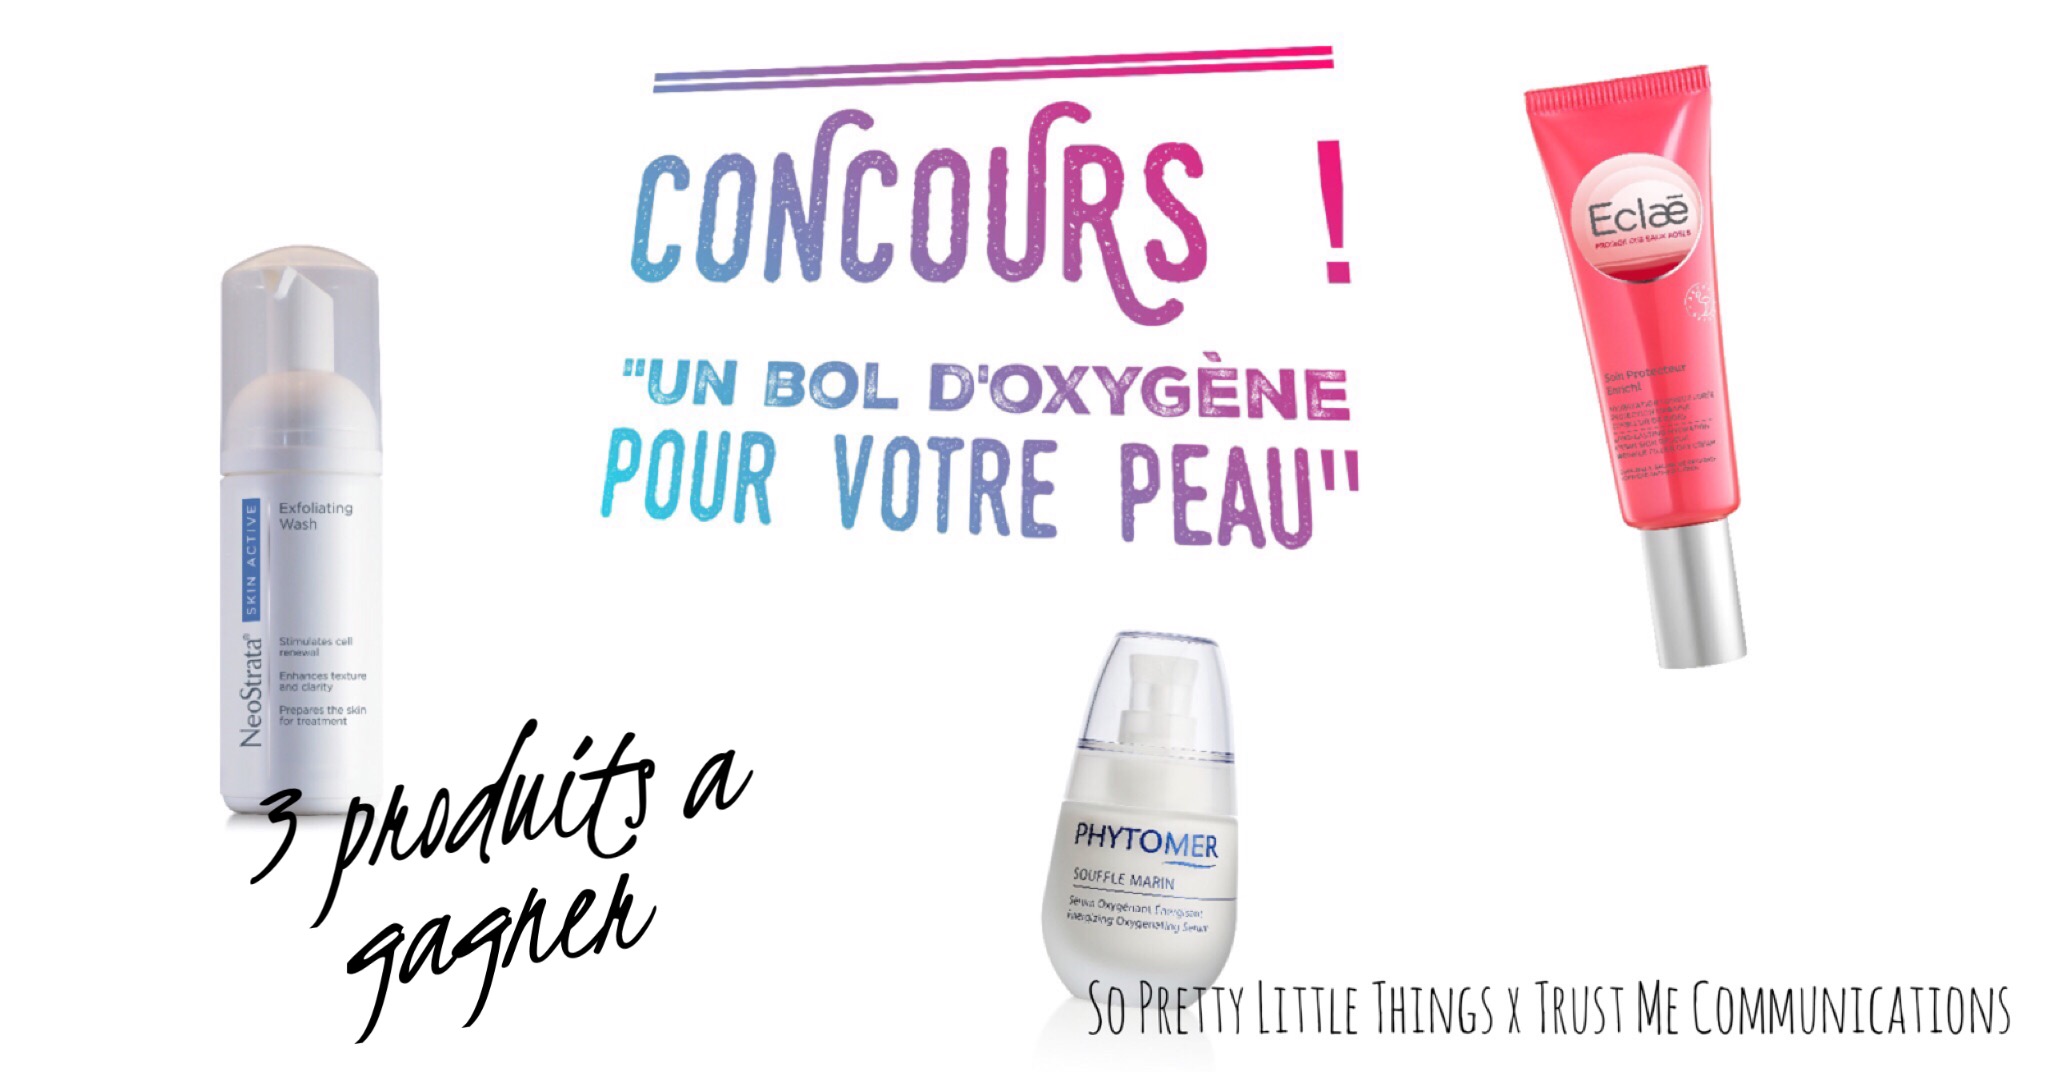 concours-cosmétiques-eclae-phytomer-neostrata